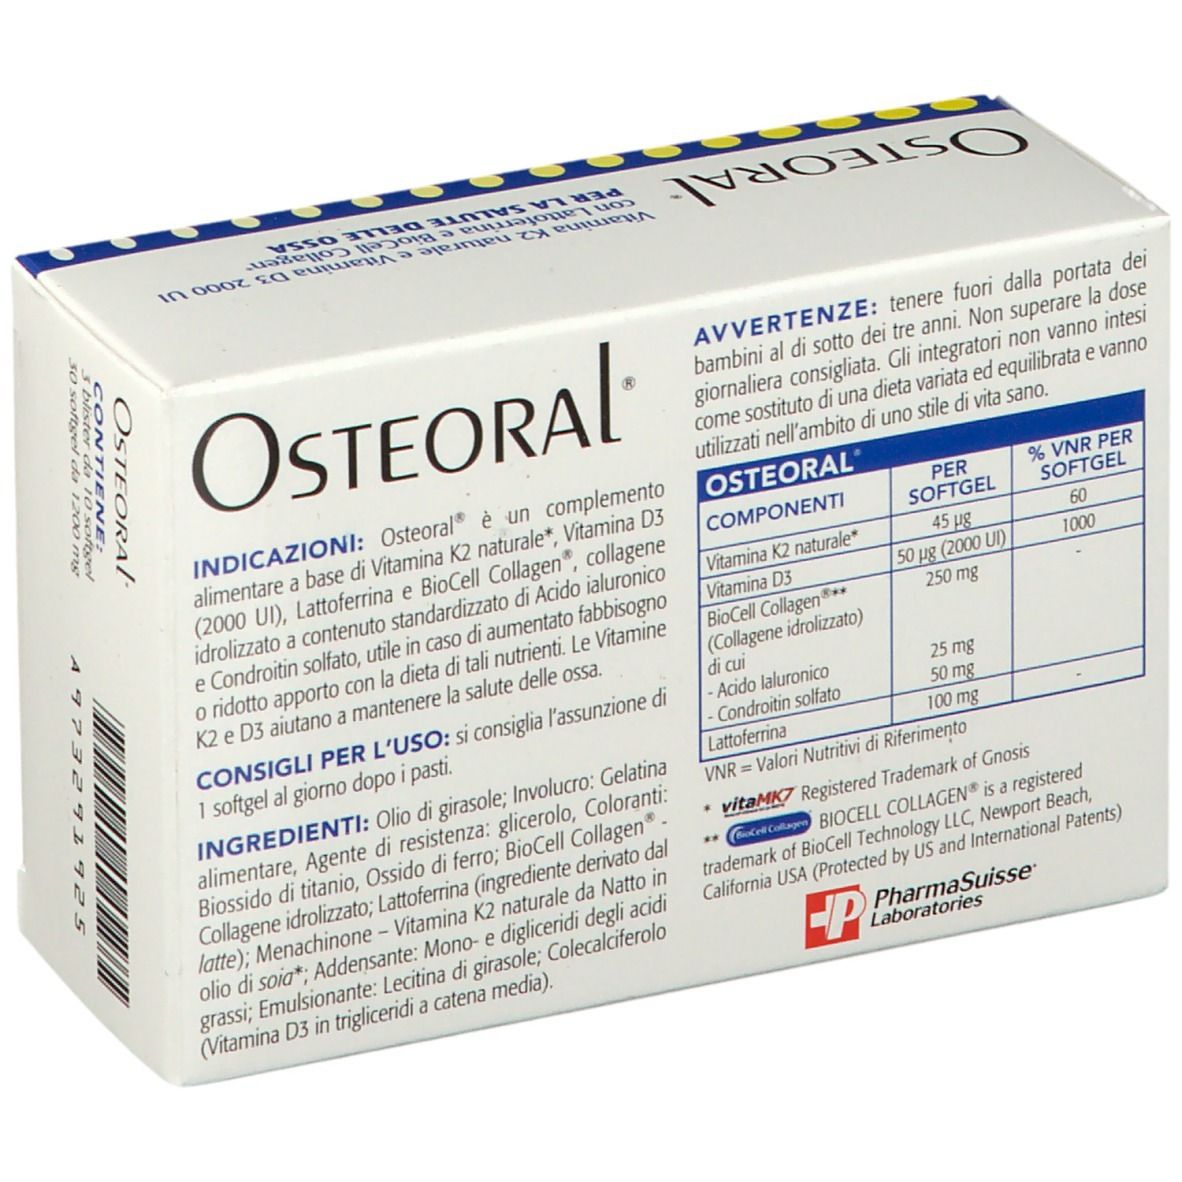 OSTEORAL®